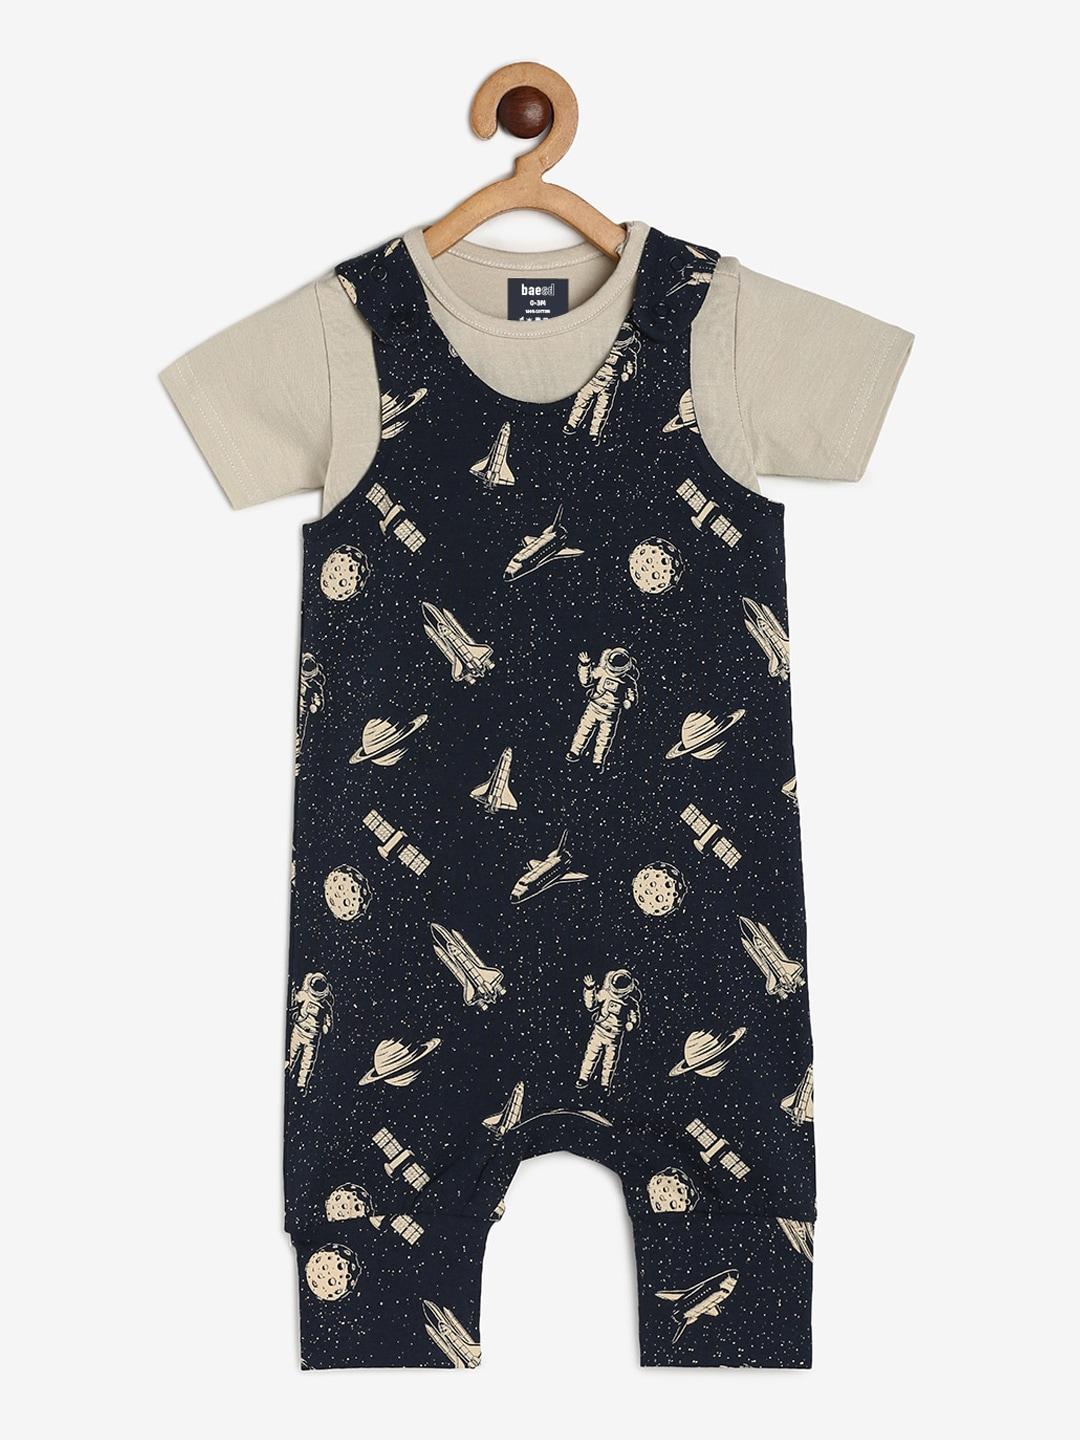 baesd infants conversational printed dungaree with t-shirt